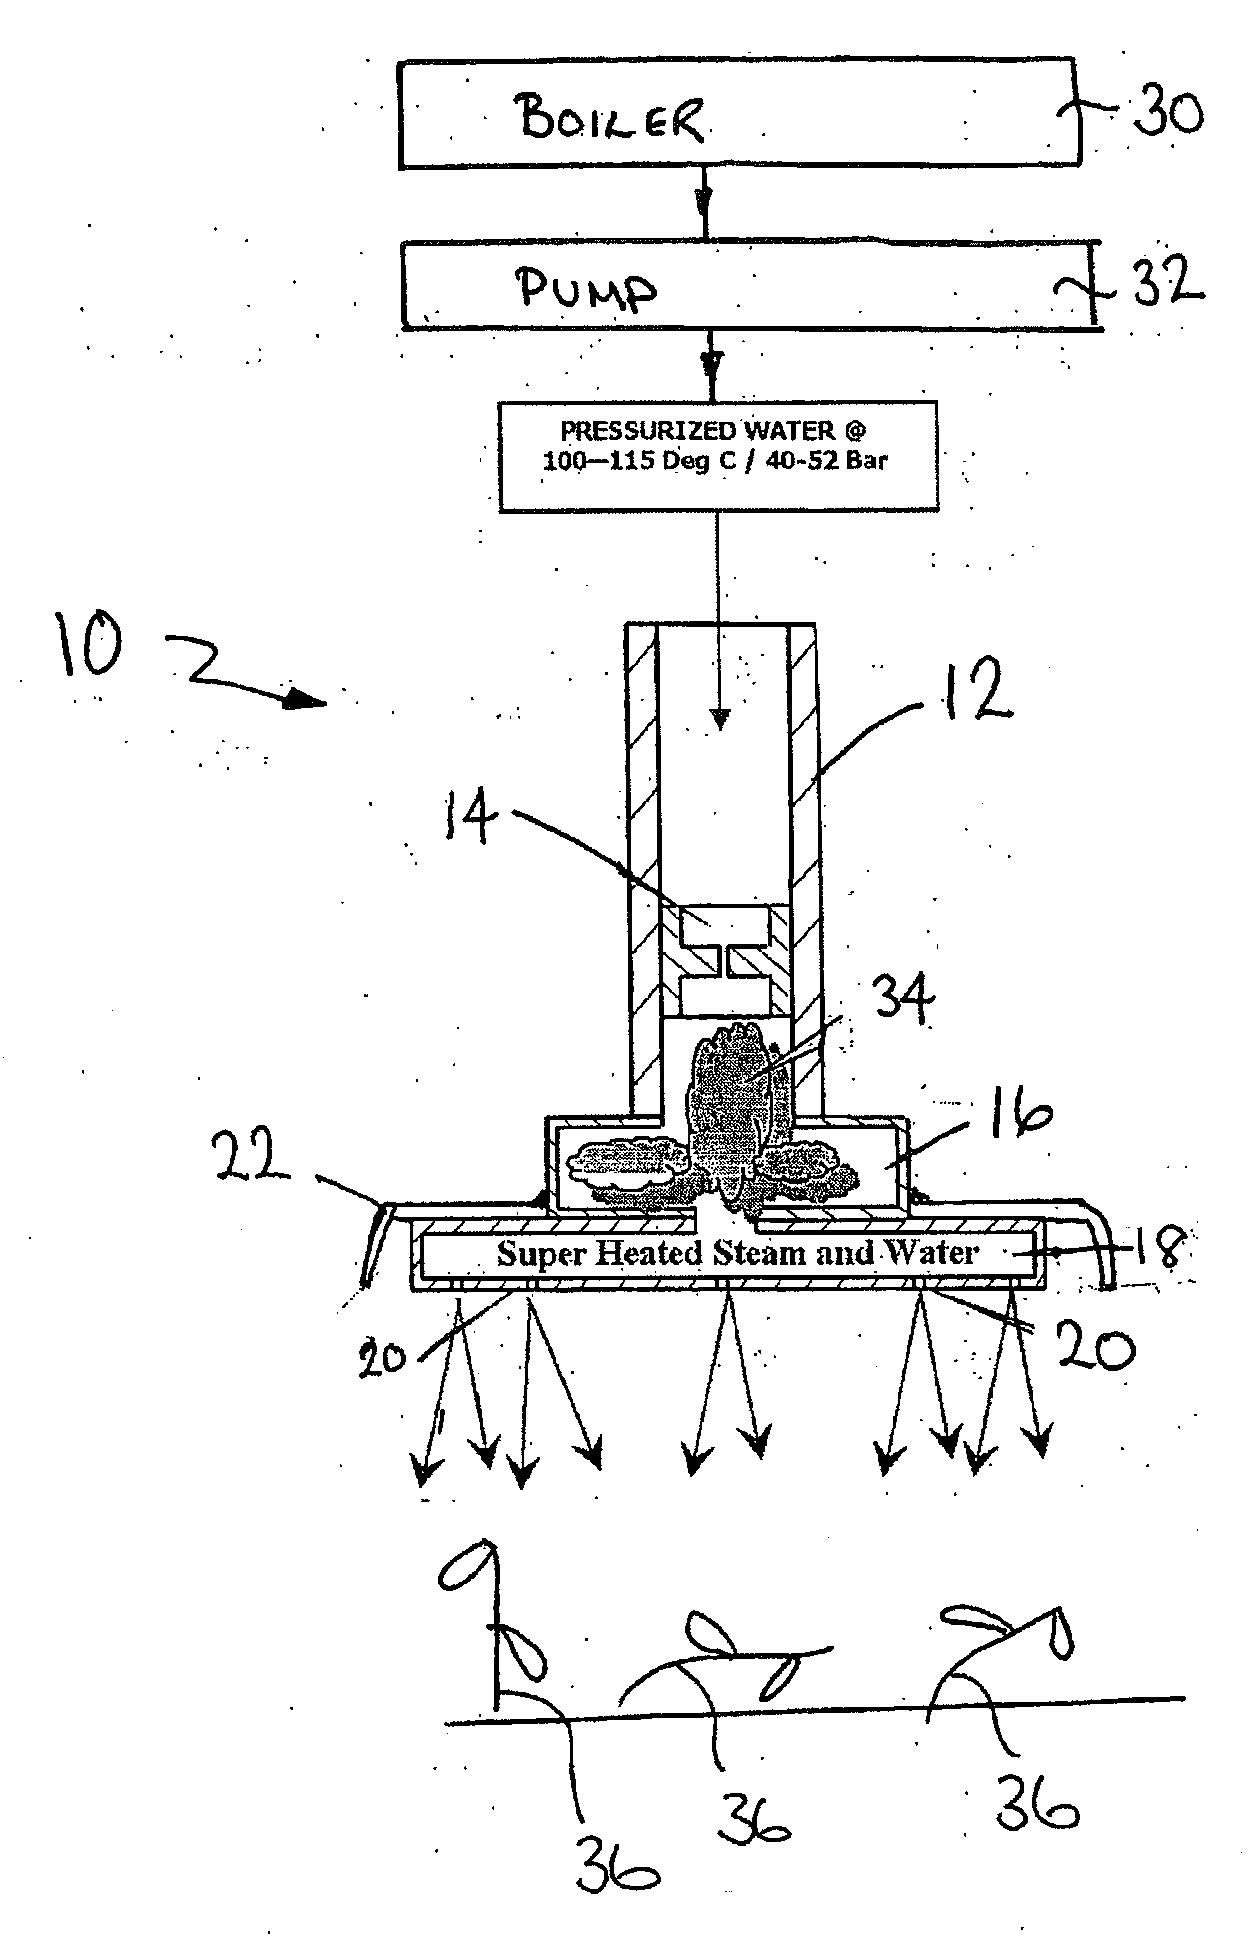 Apparatus producing superheated water and /or steam for weed killing and other applications